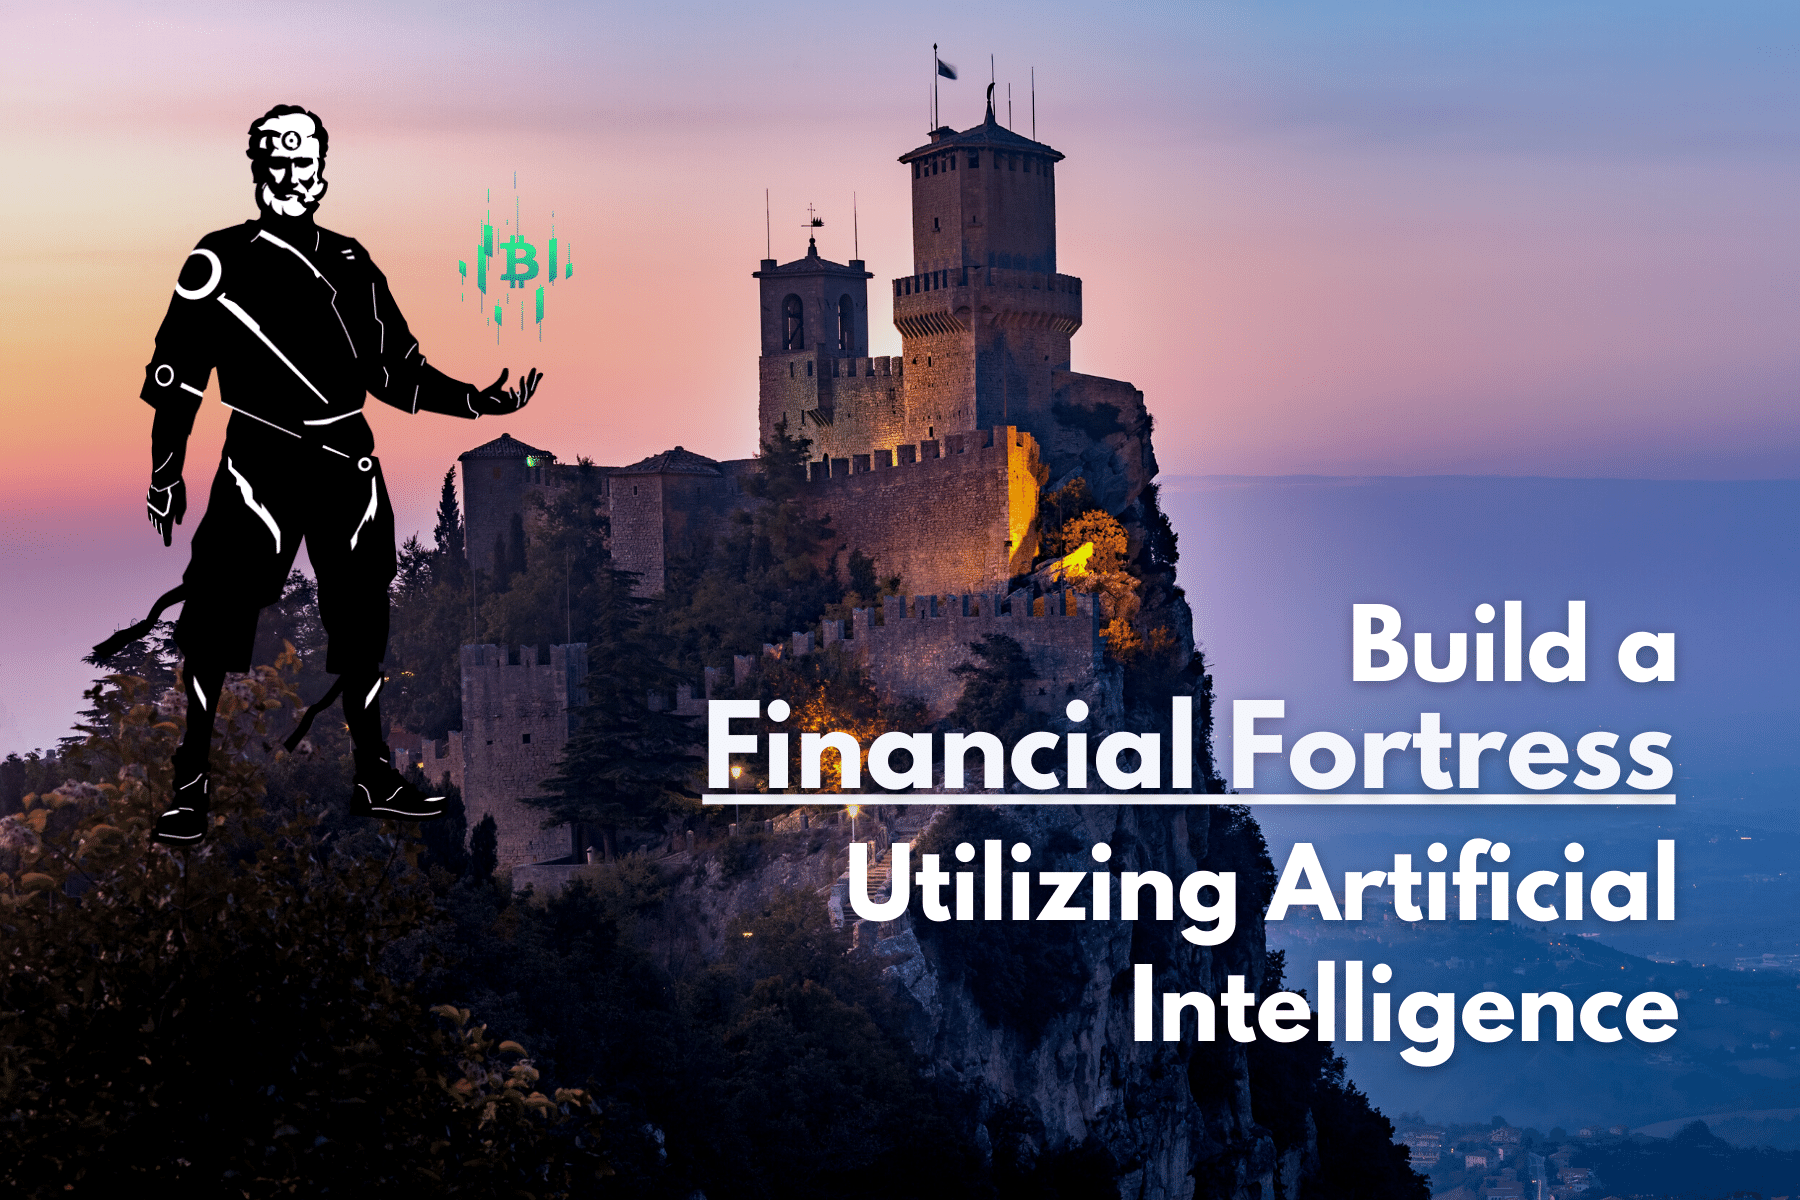 Build a Financial Fortress utilizing Artificial Intelligence